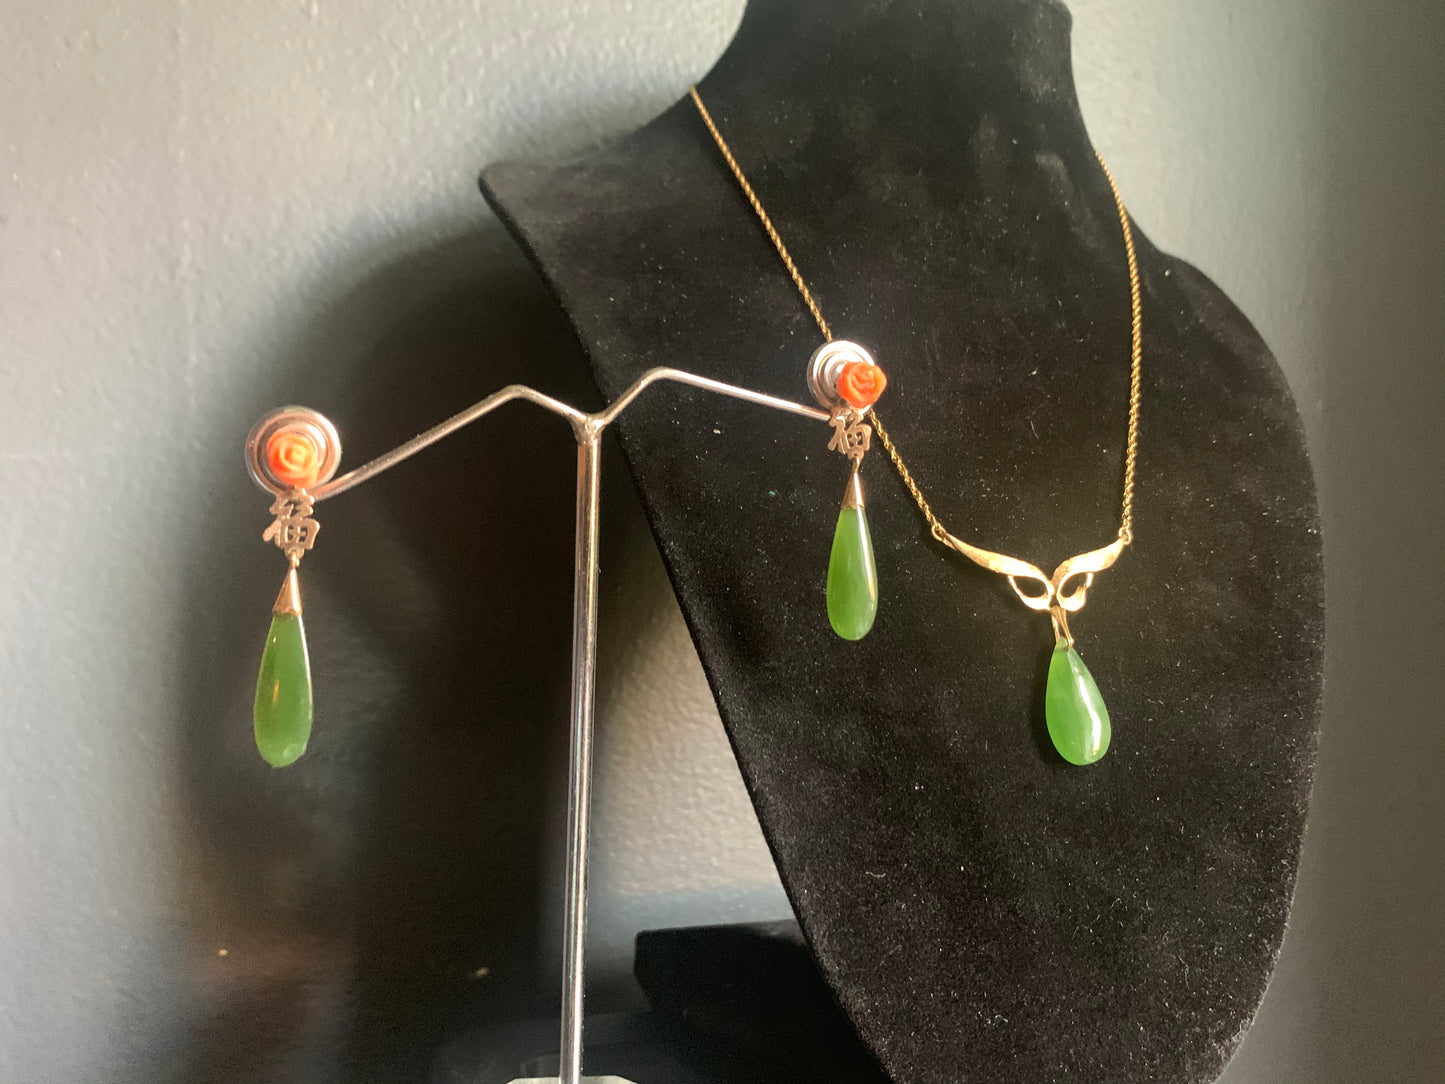 A jade ear ring and necklace set